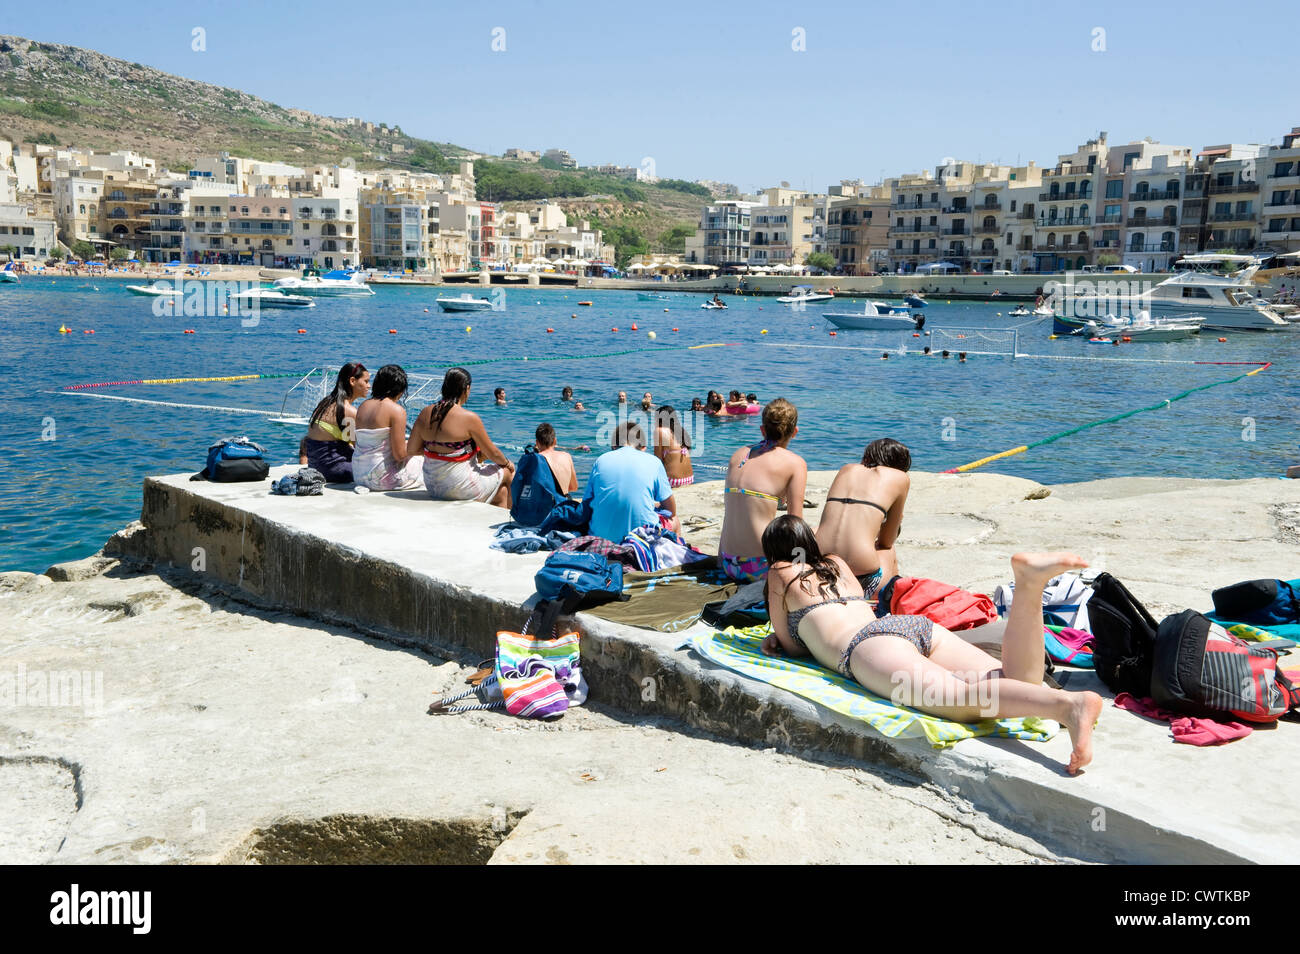 Teenagers watch watersport at Marsalforn on the Maltese island of Gozo Stock Photo